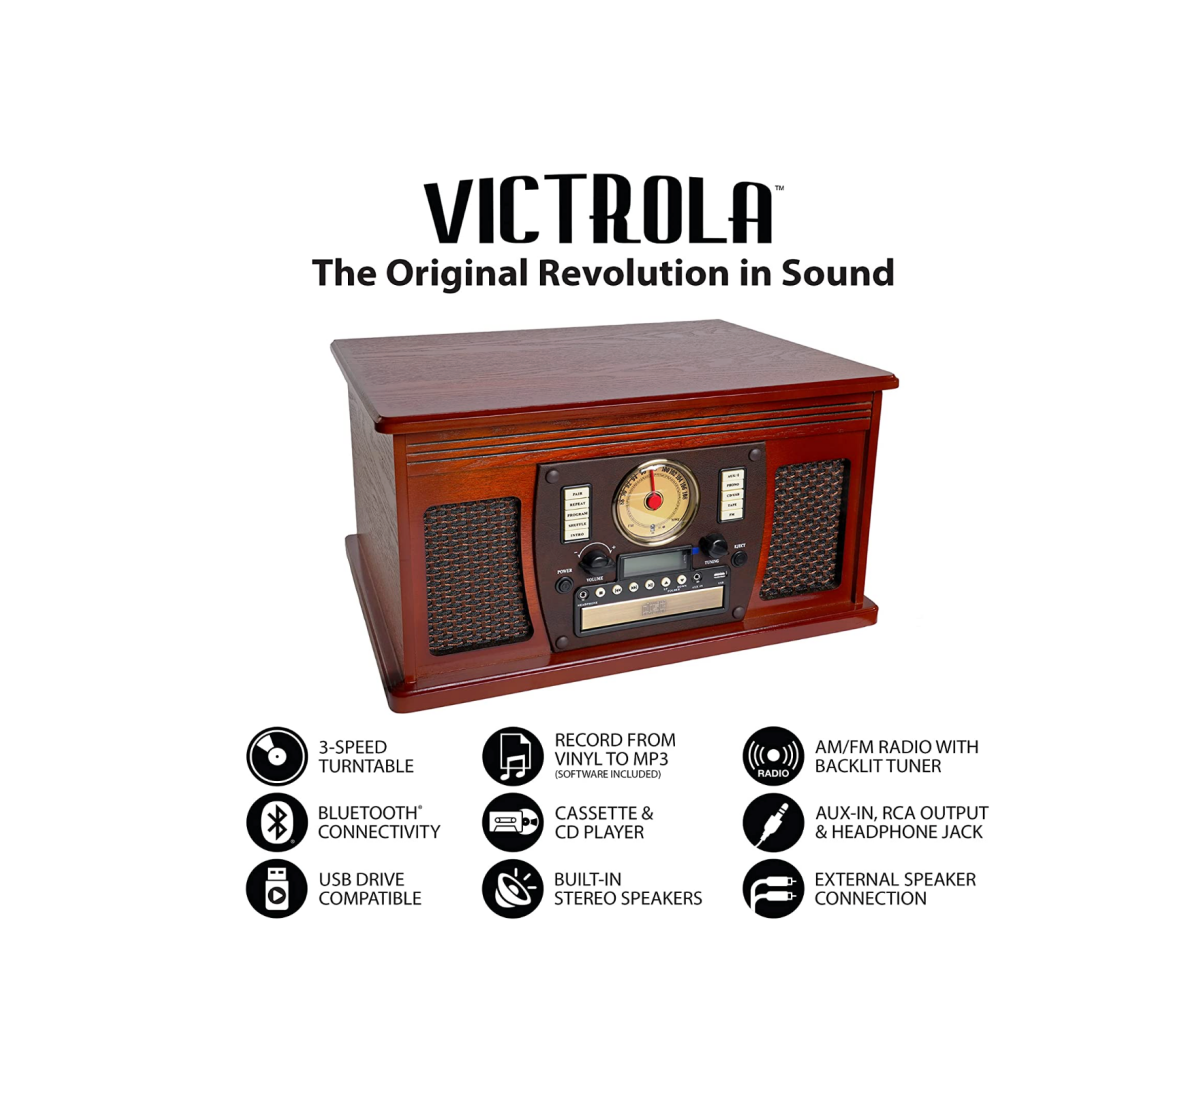 A Victrola 8-in-1 Record Player with its features explained below